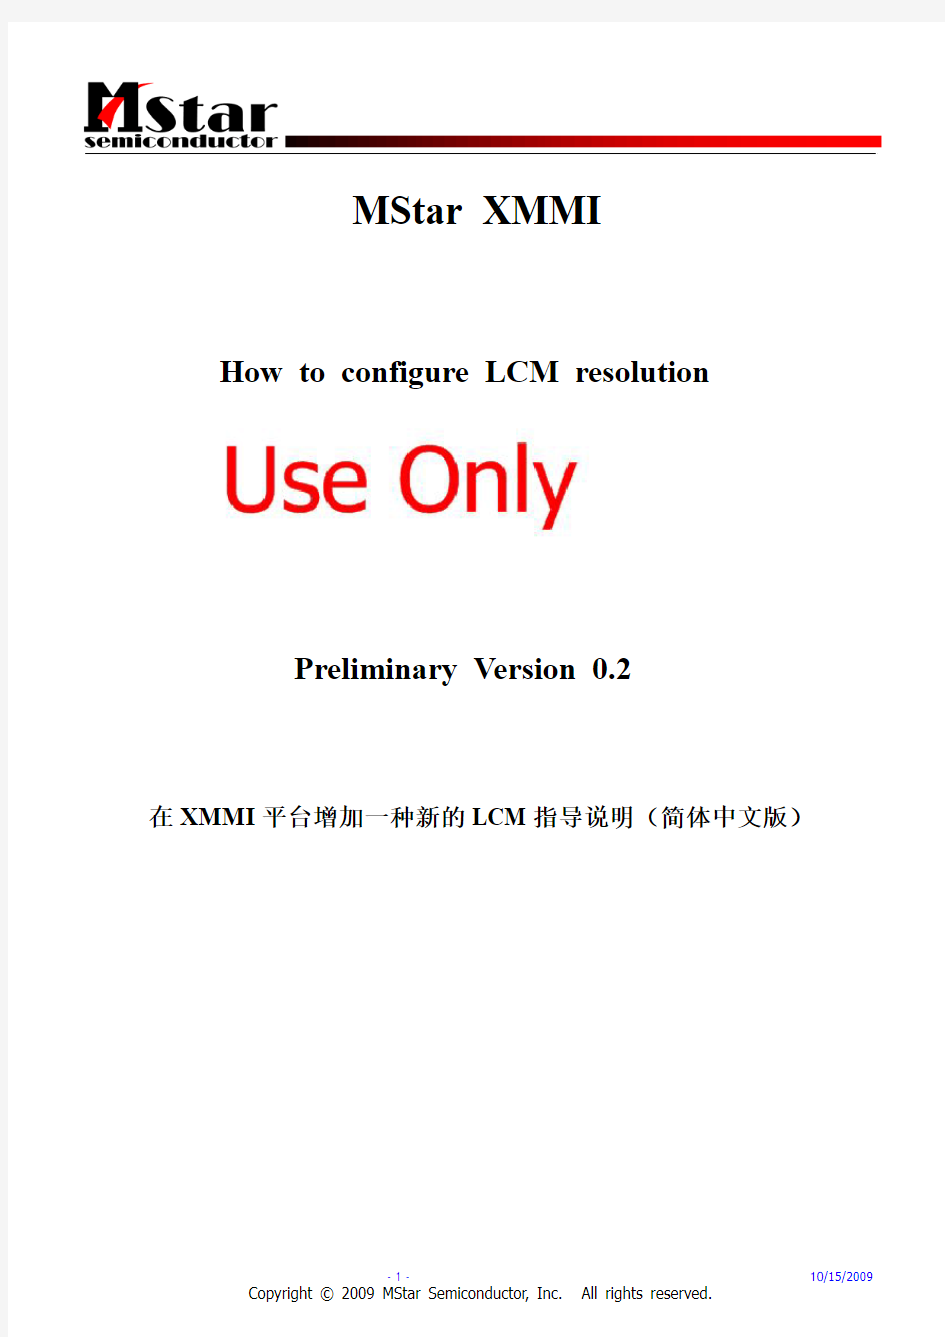 How to configure LCM resolution User Guide (Simplified Chinese Version)